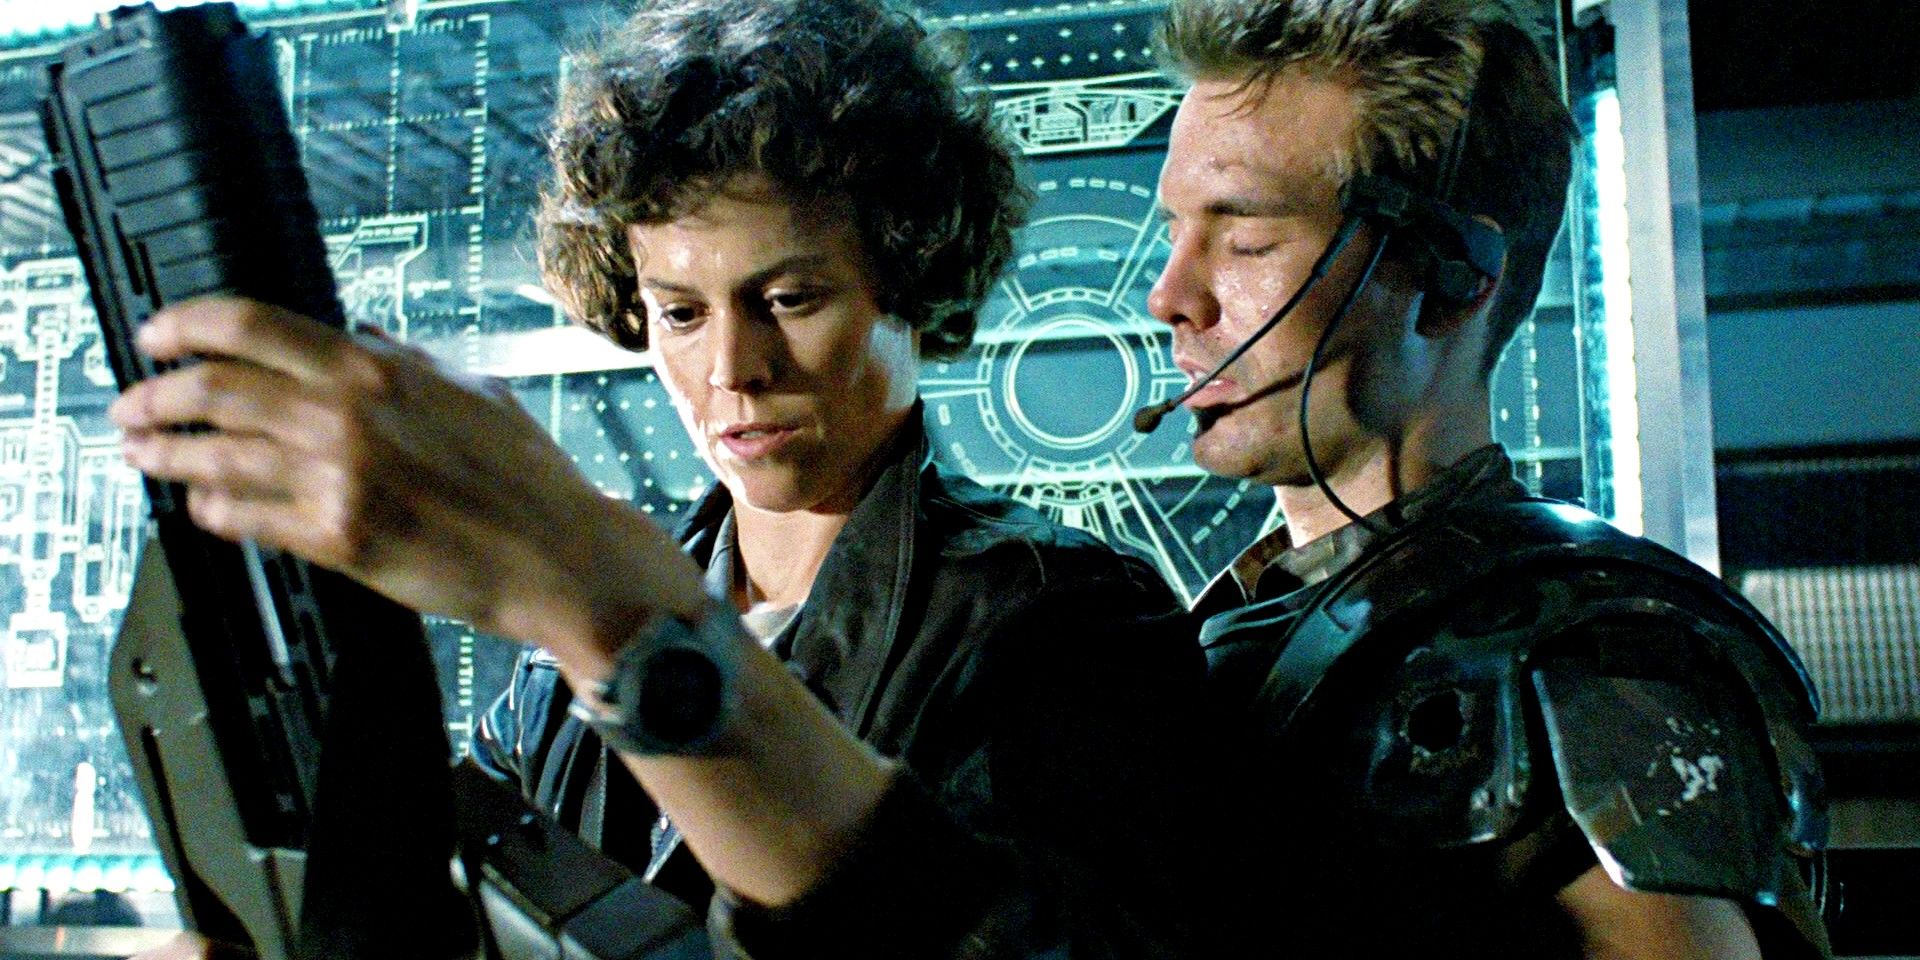 Ripley looking at her blaster while someone behind her is talking to her in Aliens